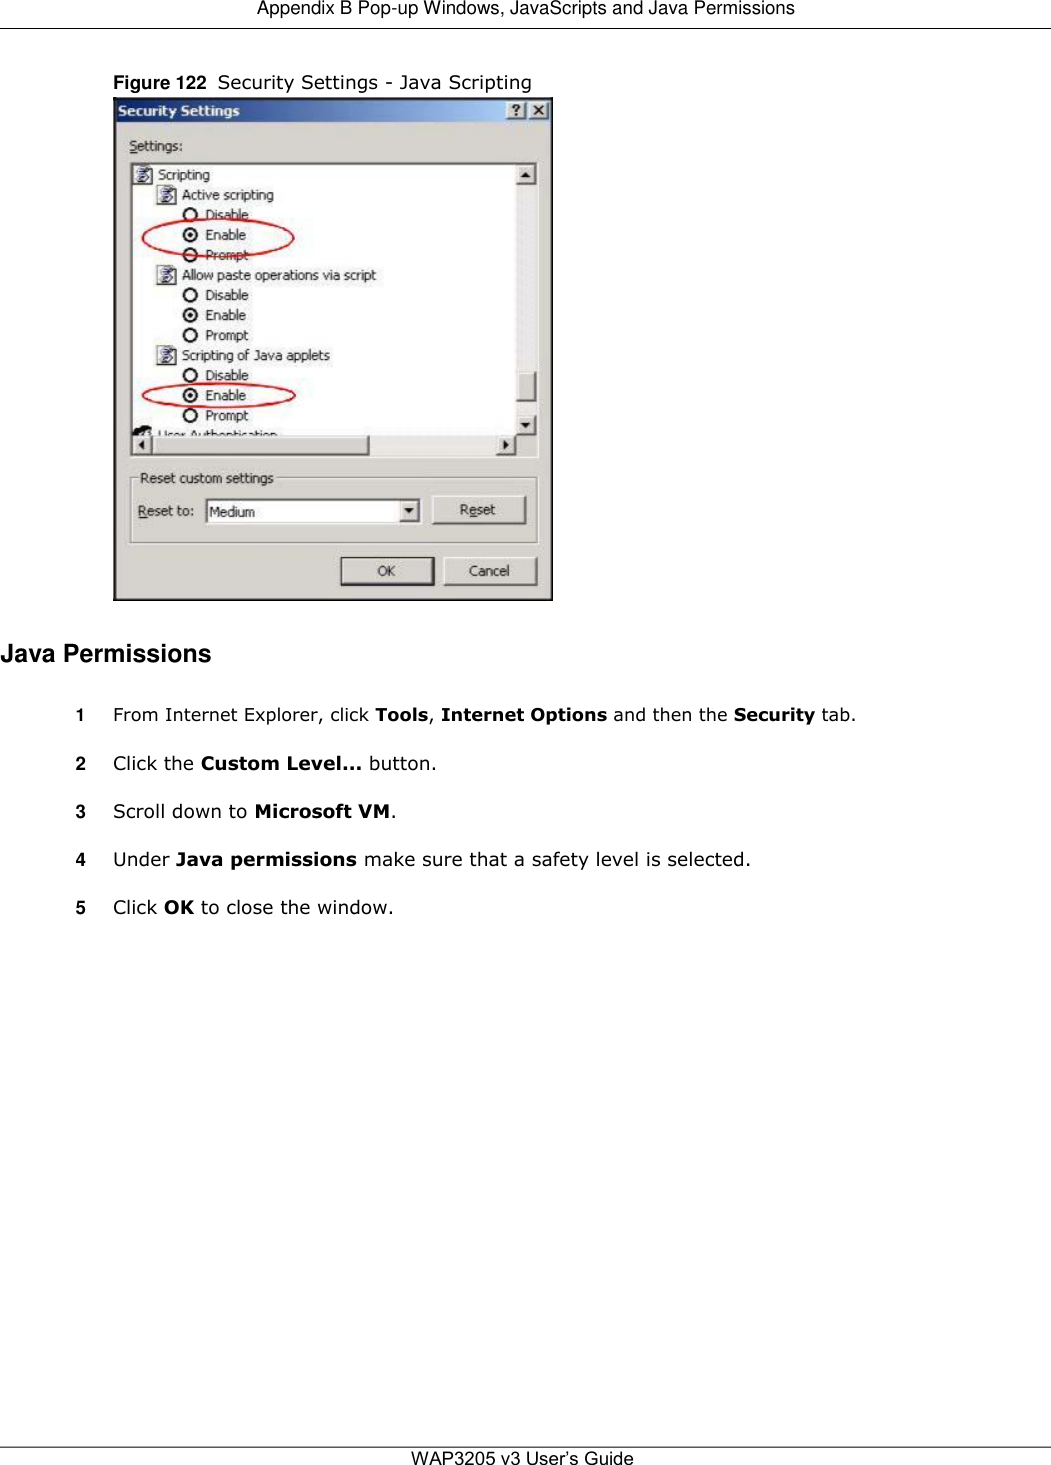  Appendix B Pop-up Windows, JavaScripts and Java Permissions   Figure 122  Security Settings - Java Scripting                           Java Permissions  1  From Internet Explorer, click Tools, Internet Options and then the Security tab.  2  Click the Custom Level... button.  3  Scroll down to Microsoft VM.  4  Under Java permissions make sure that a safety level is selected.  5  Click OK to close the window.                          WAP3205 v3 User’s Guide 